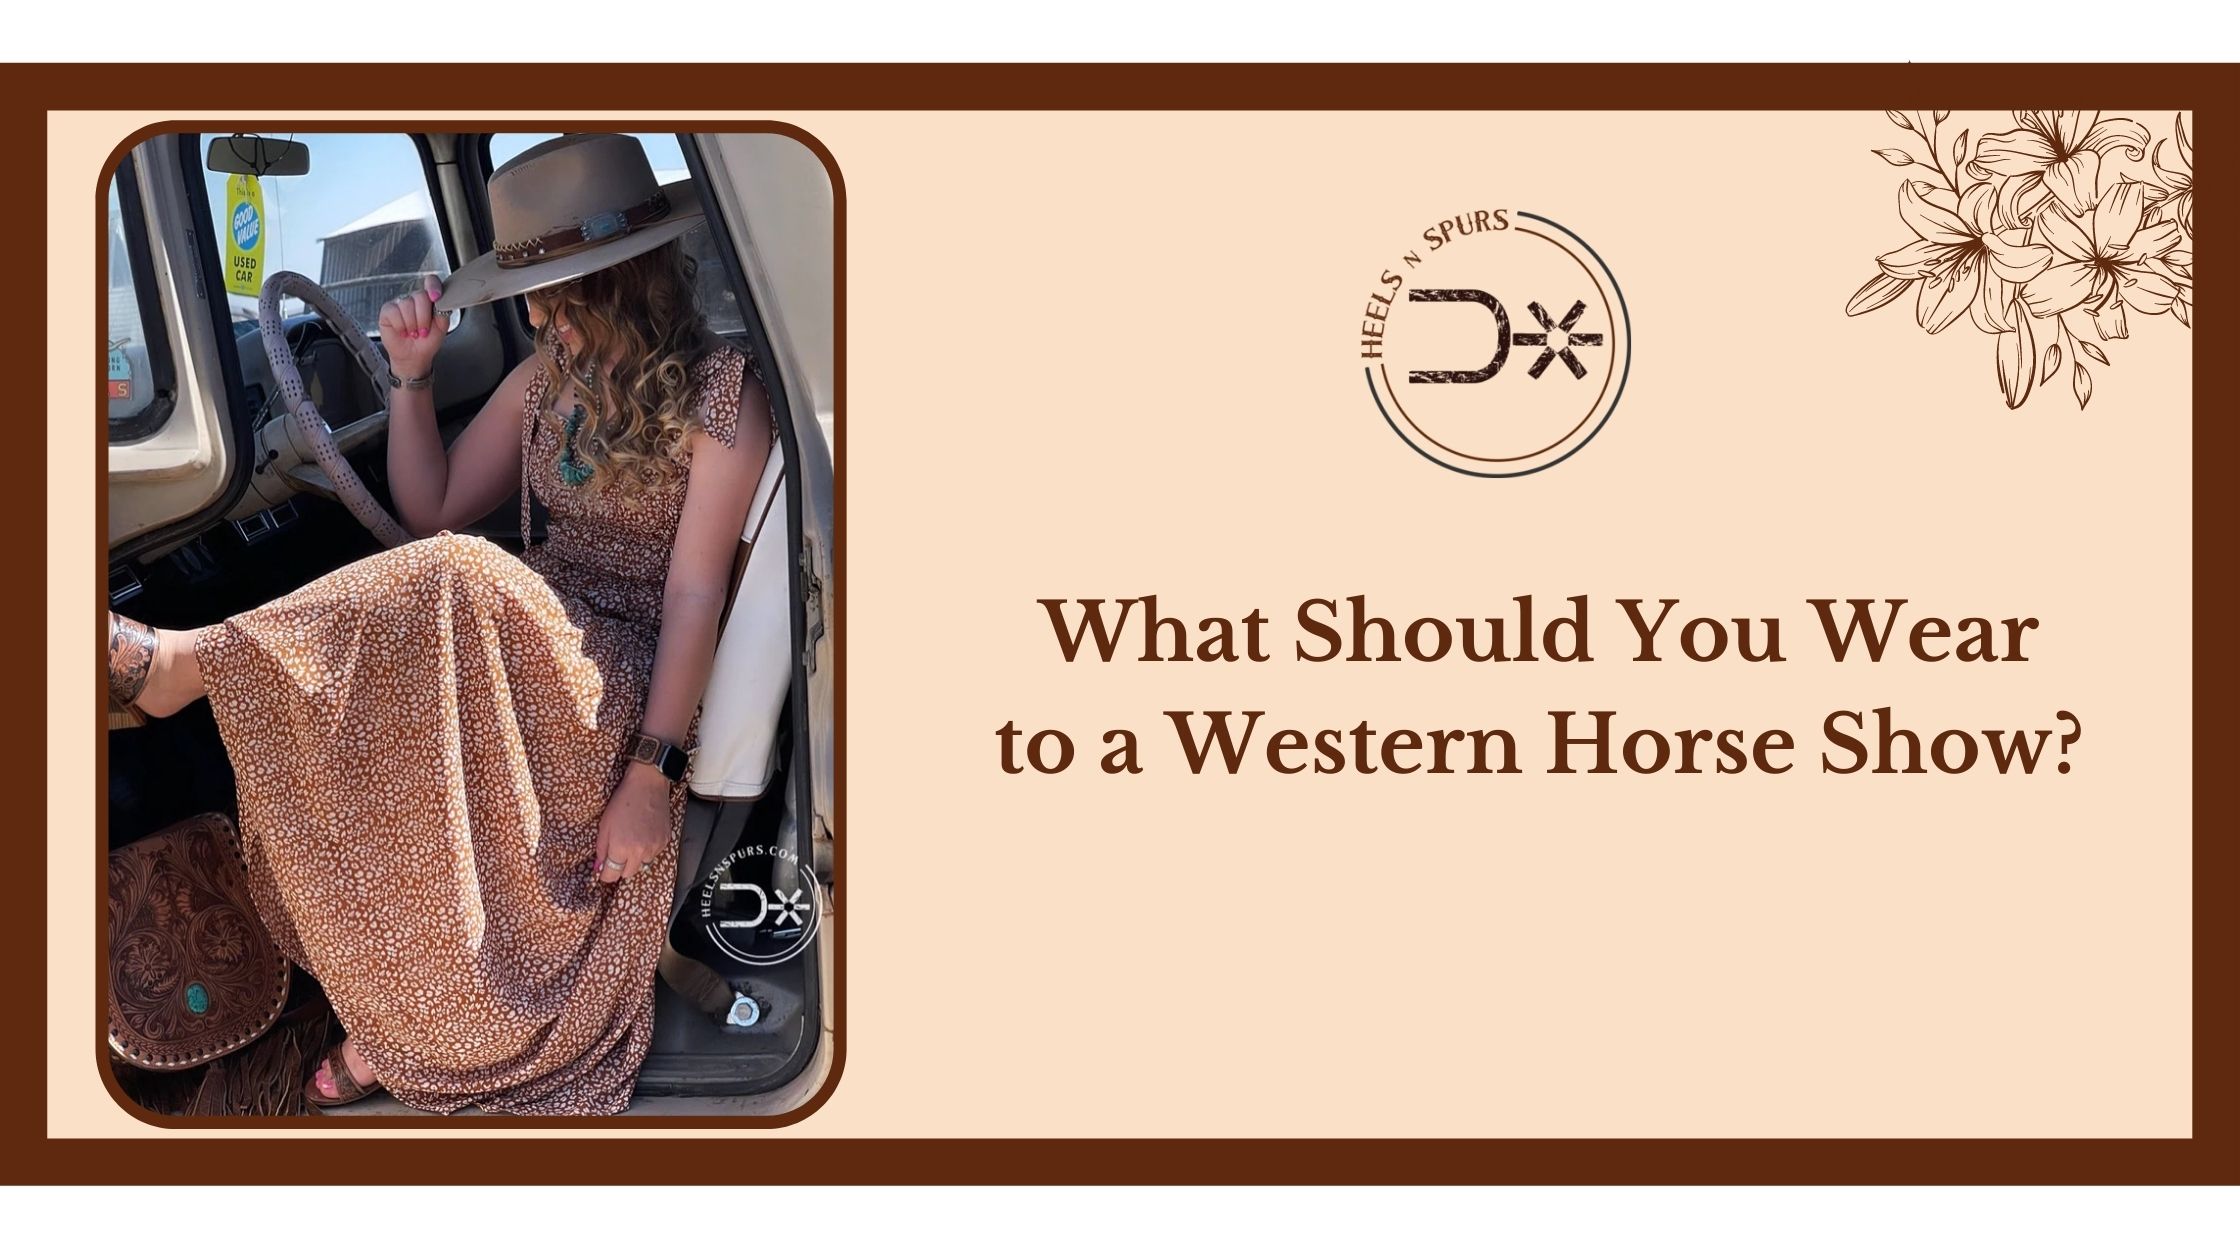 What Should You Wear to a Western Horse Show?